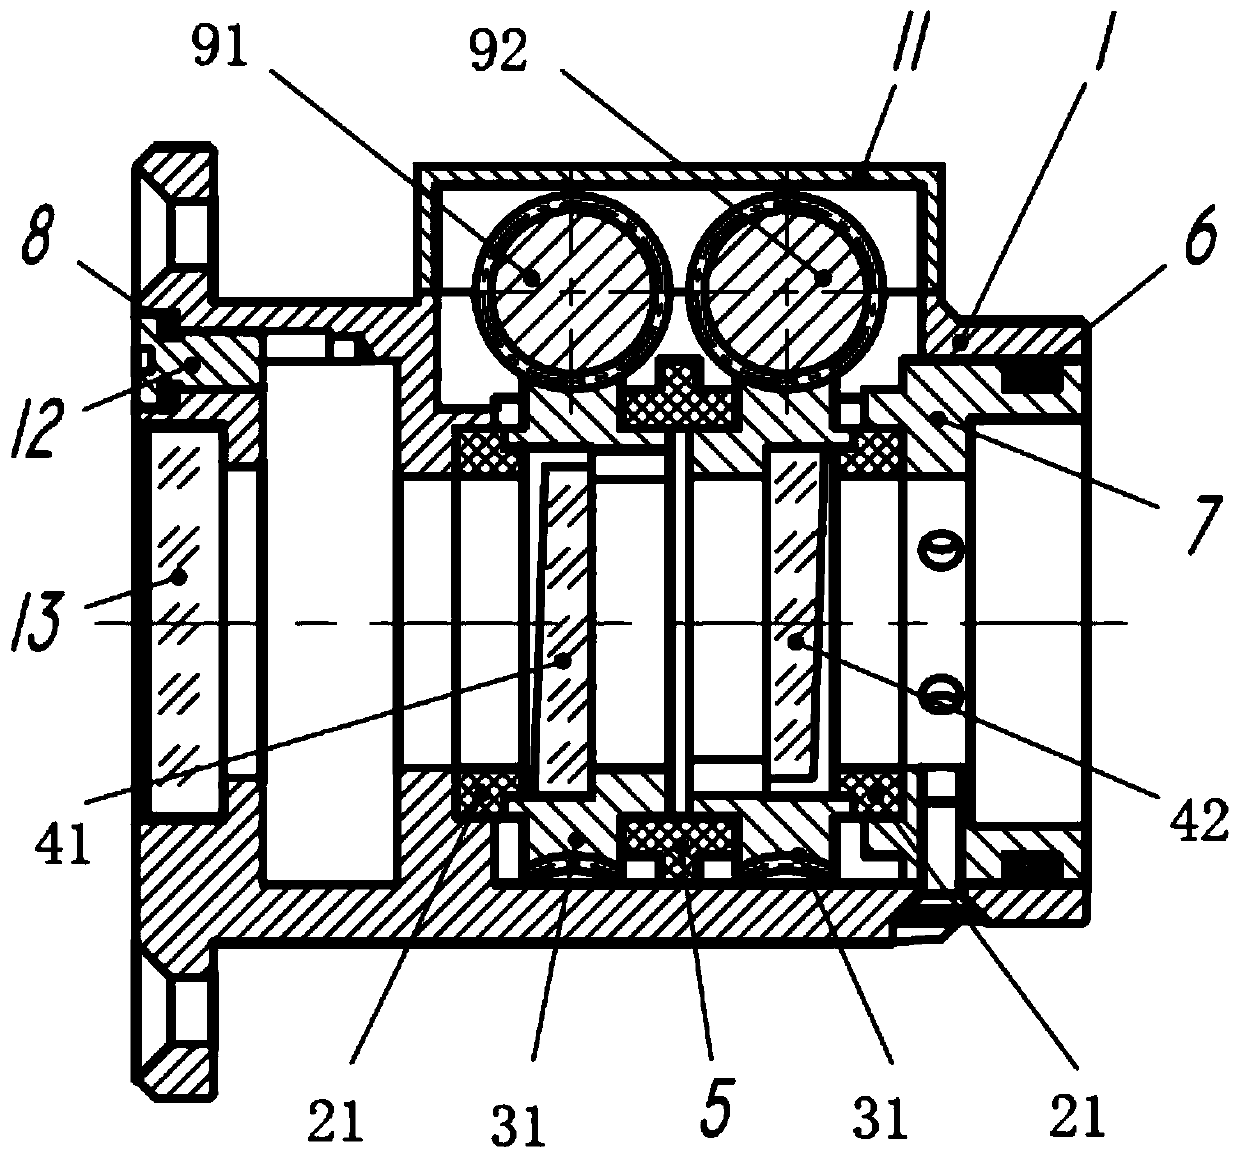 Optical axis adjusting assembly convenient for adjusting optical path